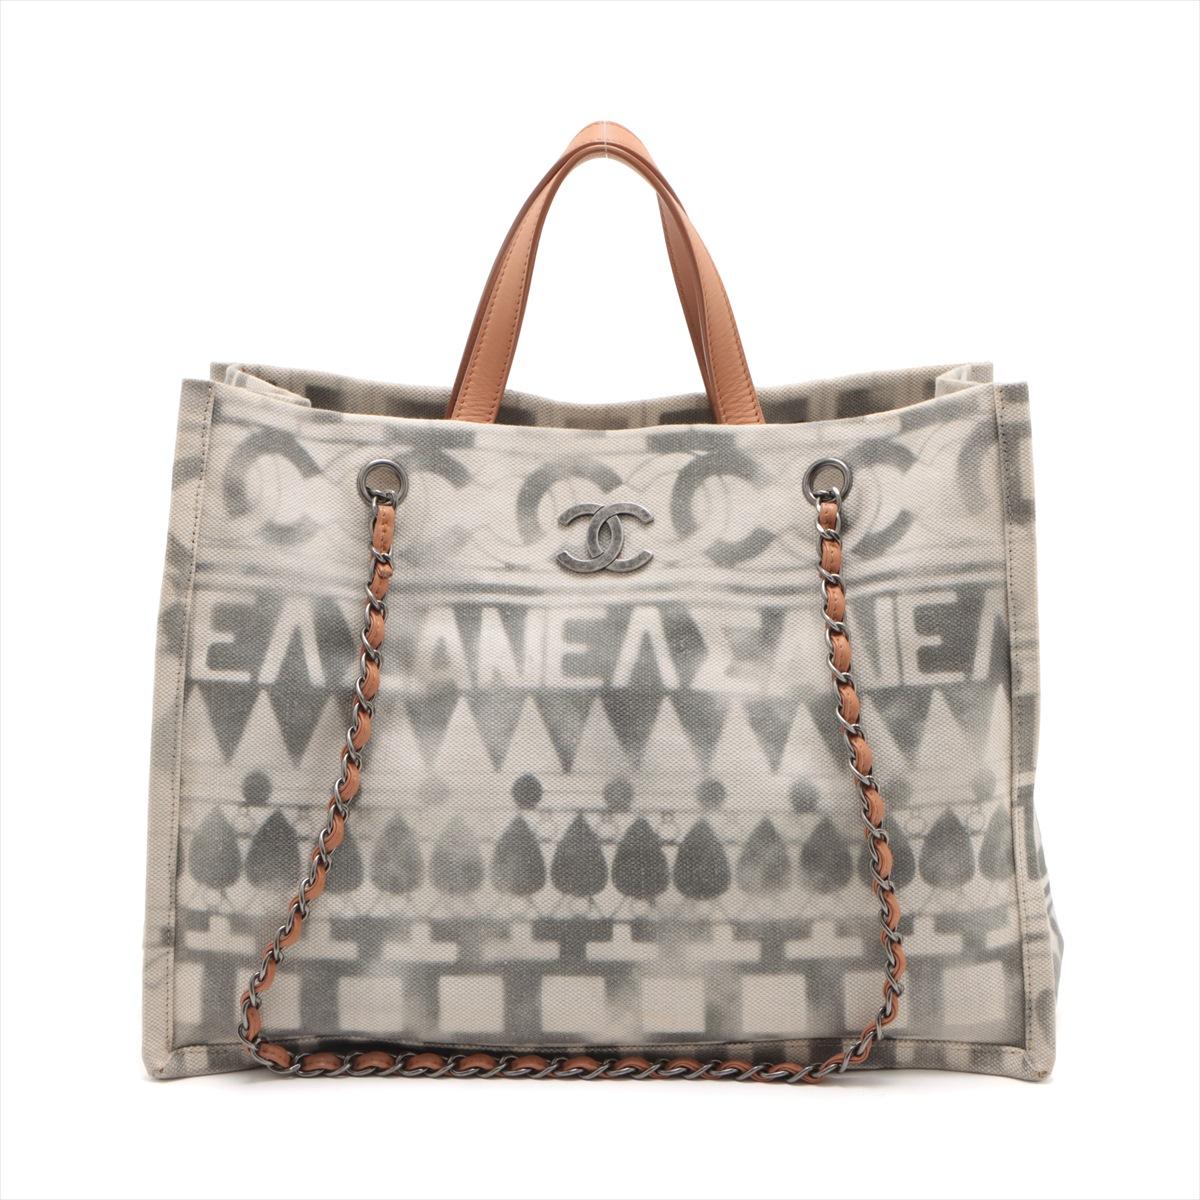 The Chanel CC Canvas & Leather Chain Tote Bag in Gray and White is a sophisticated and iconic accessory that seamlessly blends luxury and functionality. Crafted from durable canvas and supple leather. The gray and white color palette exudes